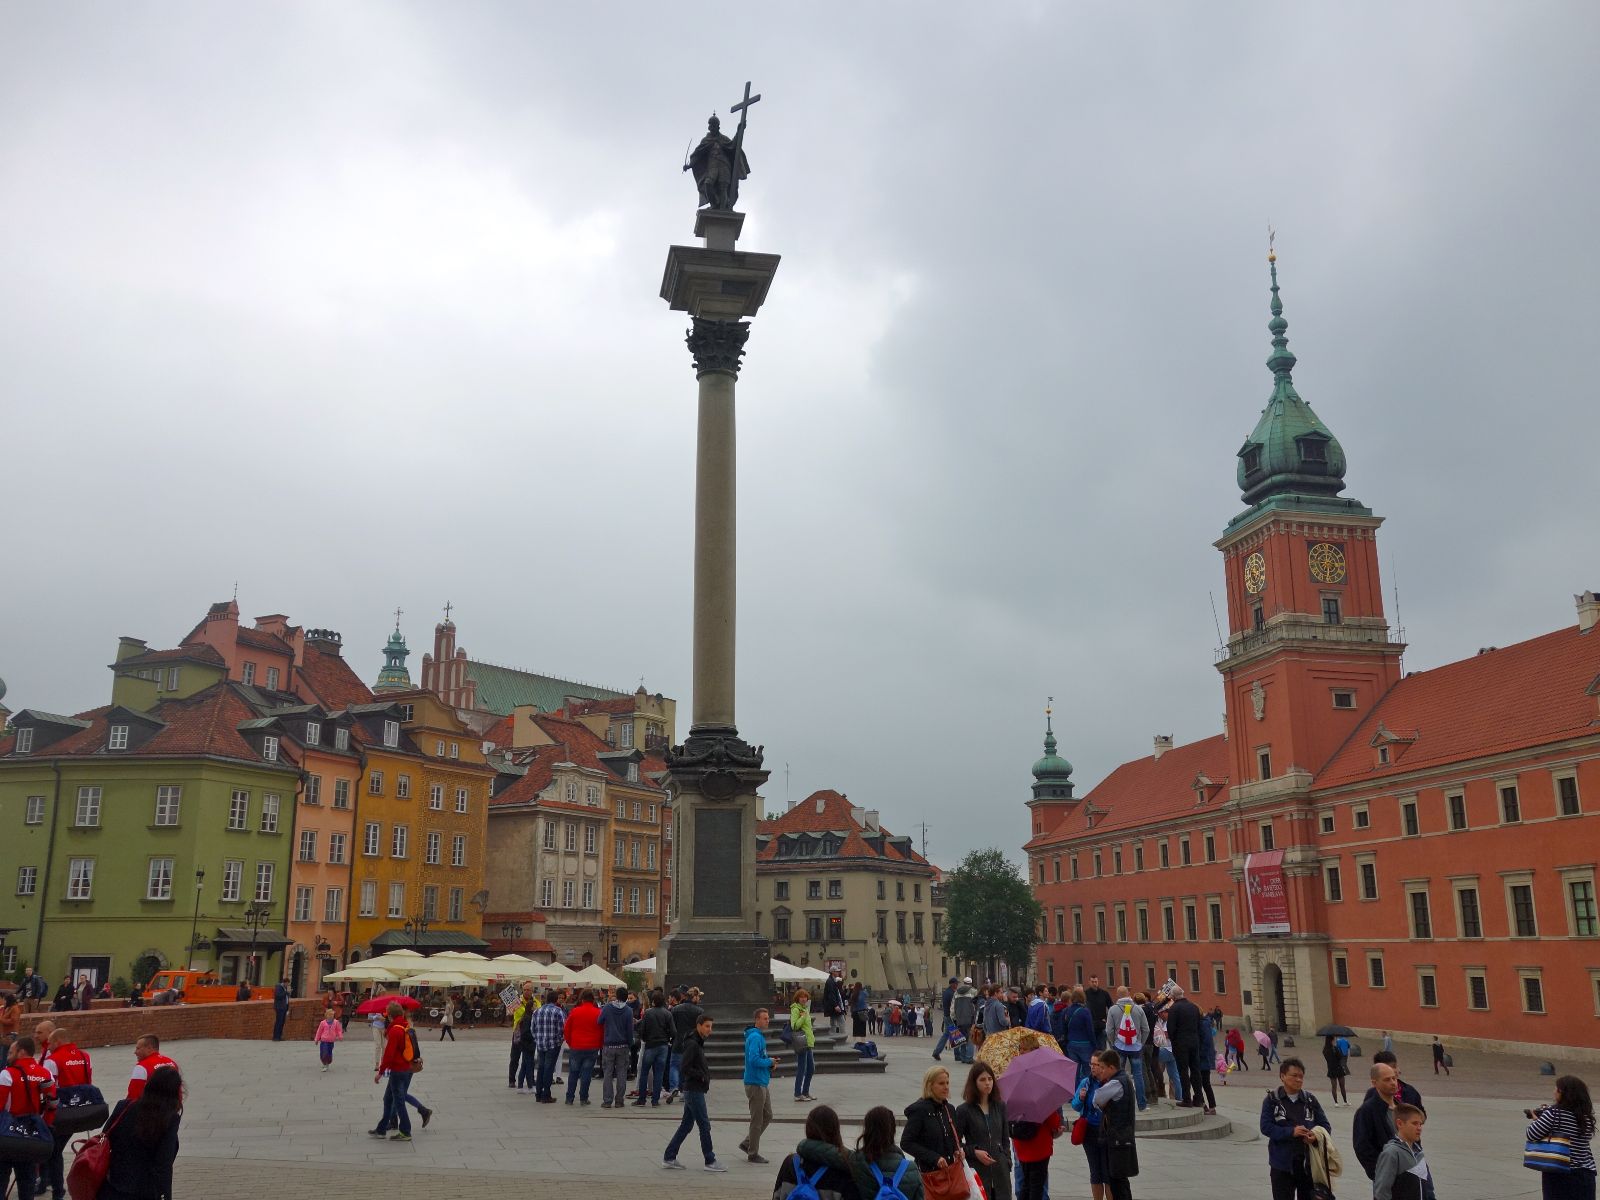 Busy tourist attraction in Poland